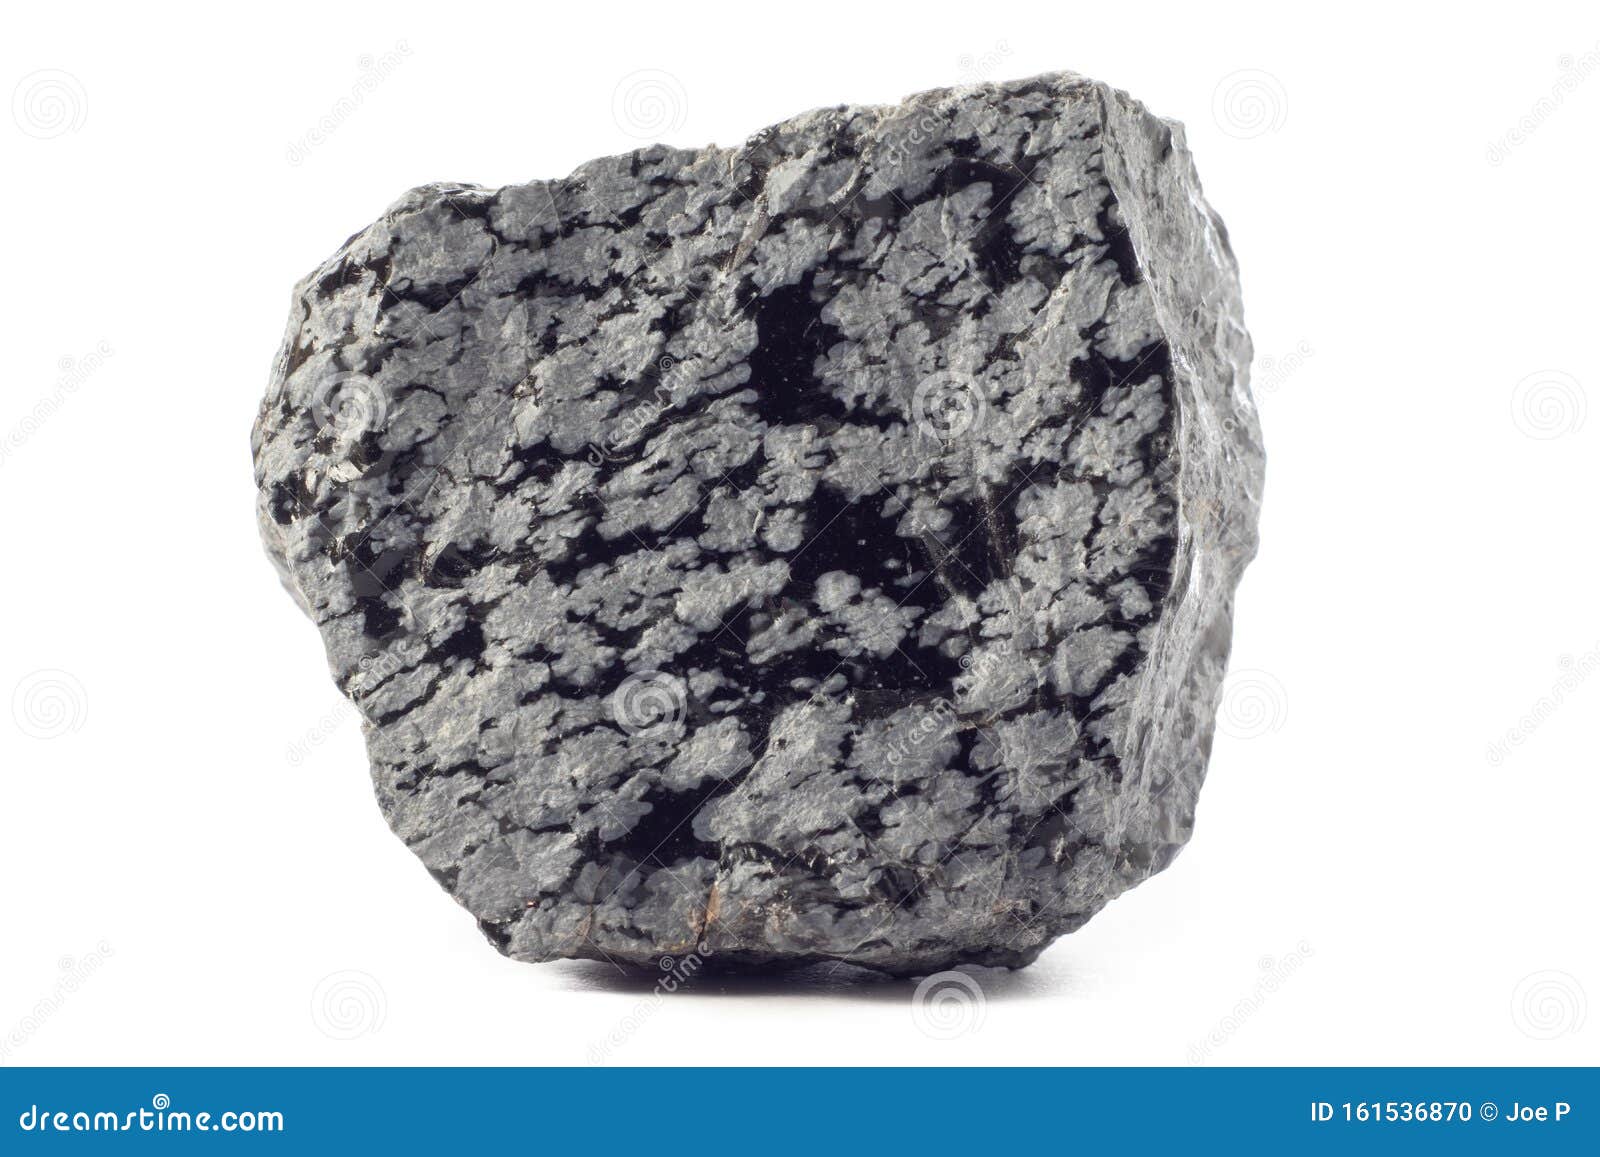 rough stone of obsidian mineral from the usa  on a pure white background